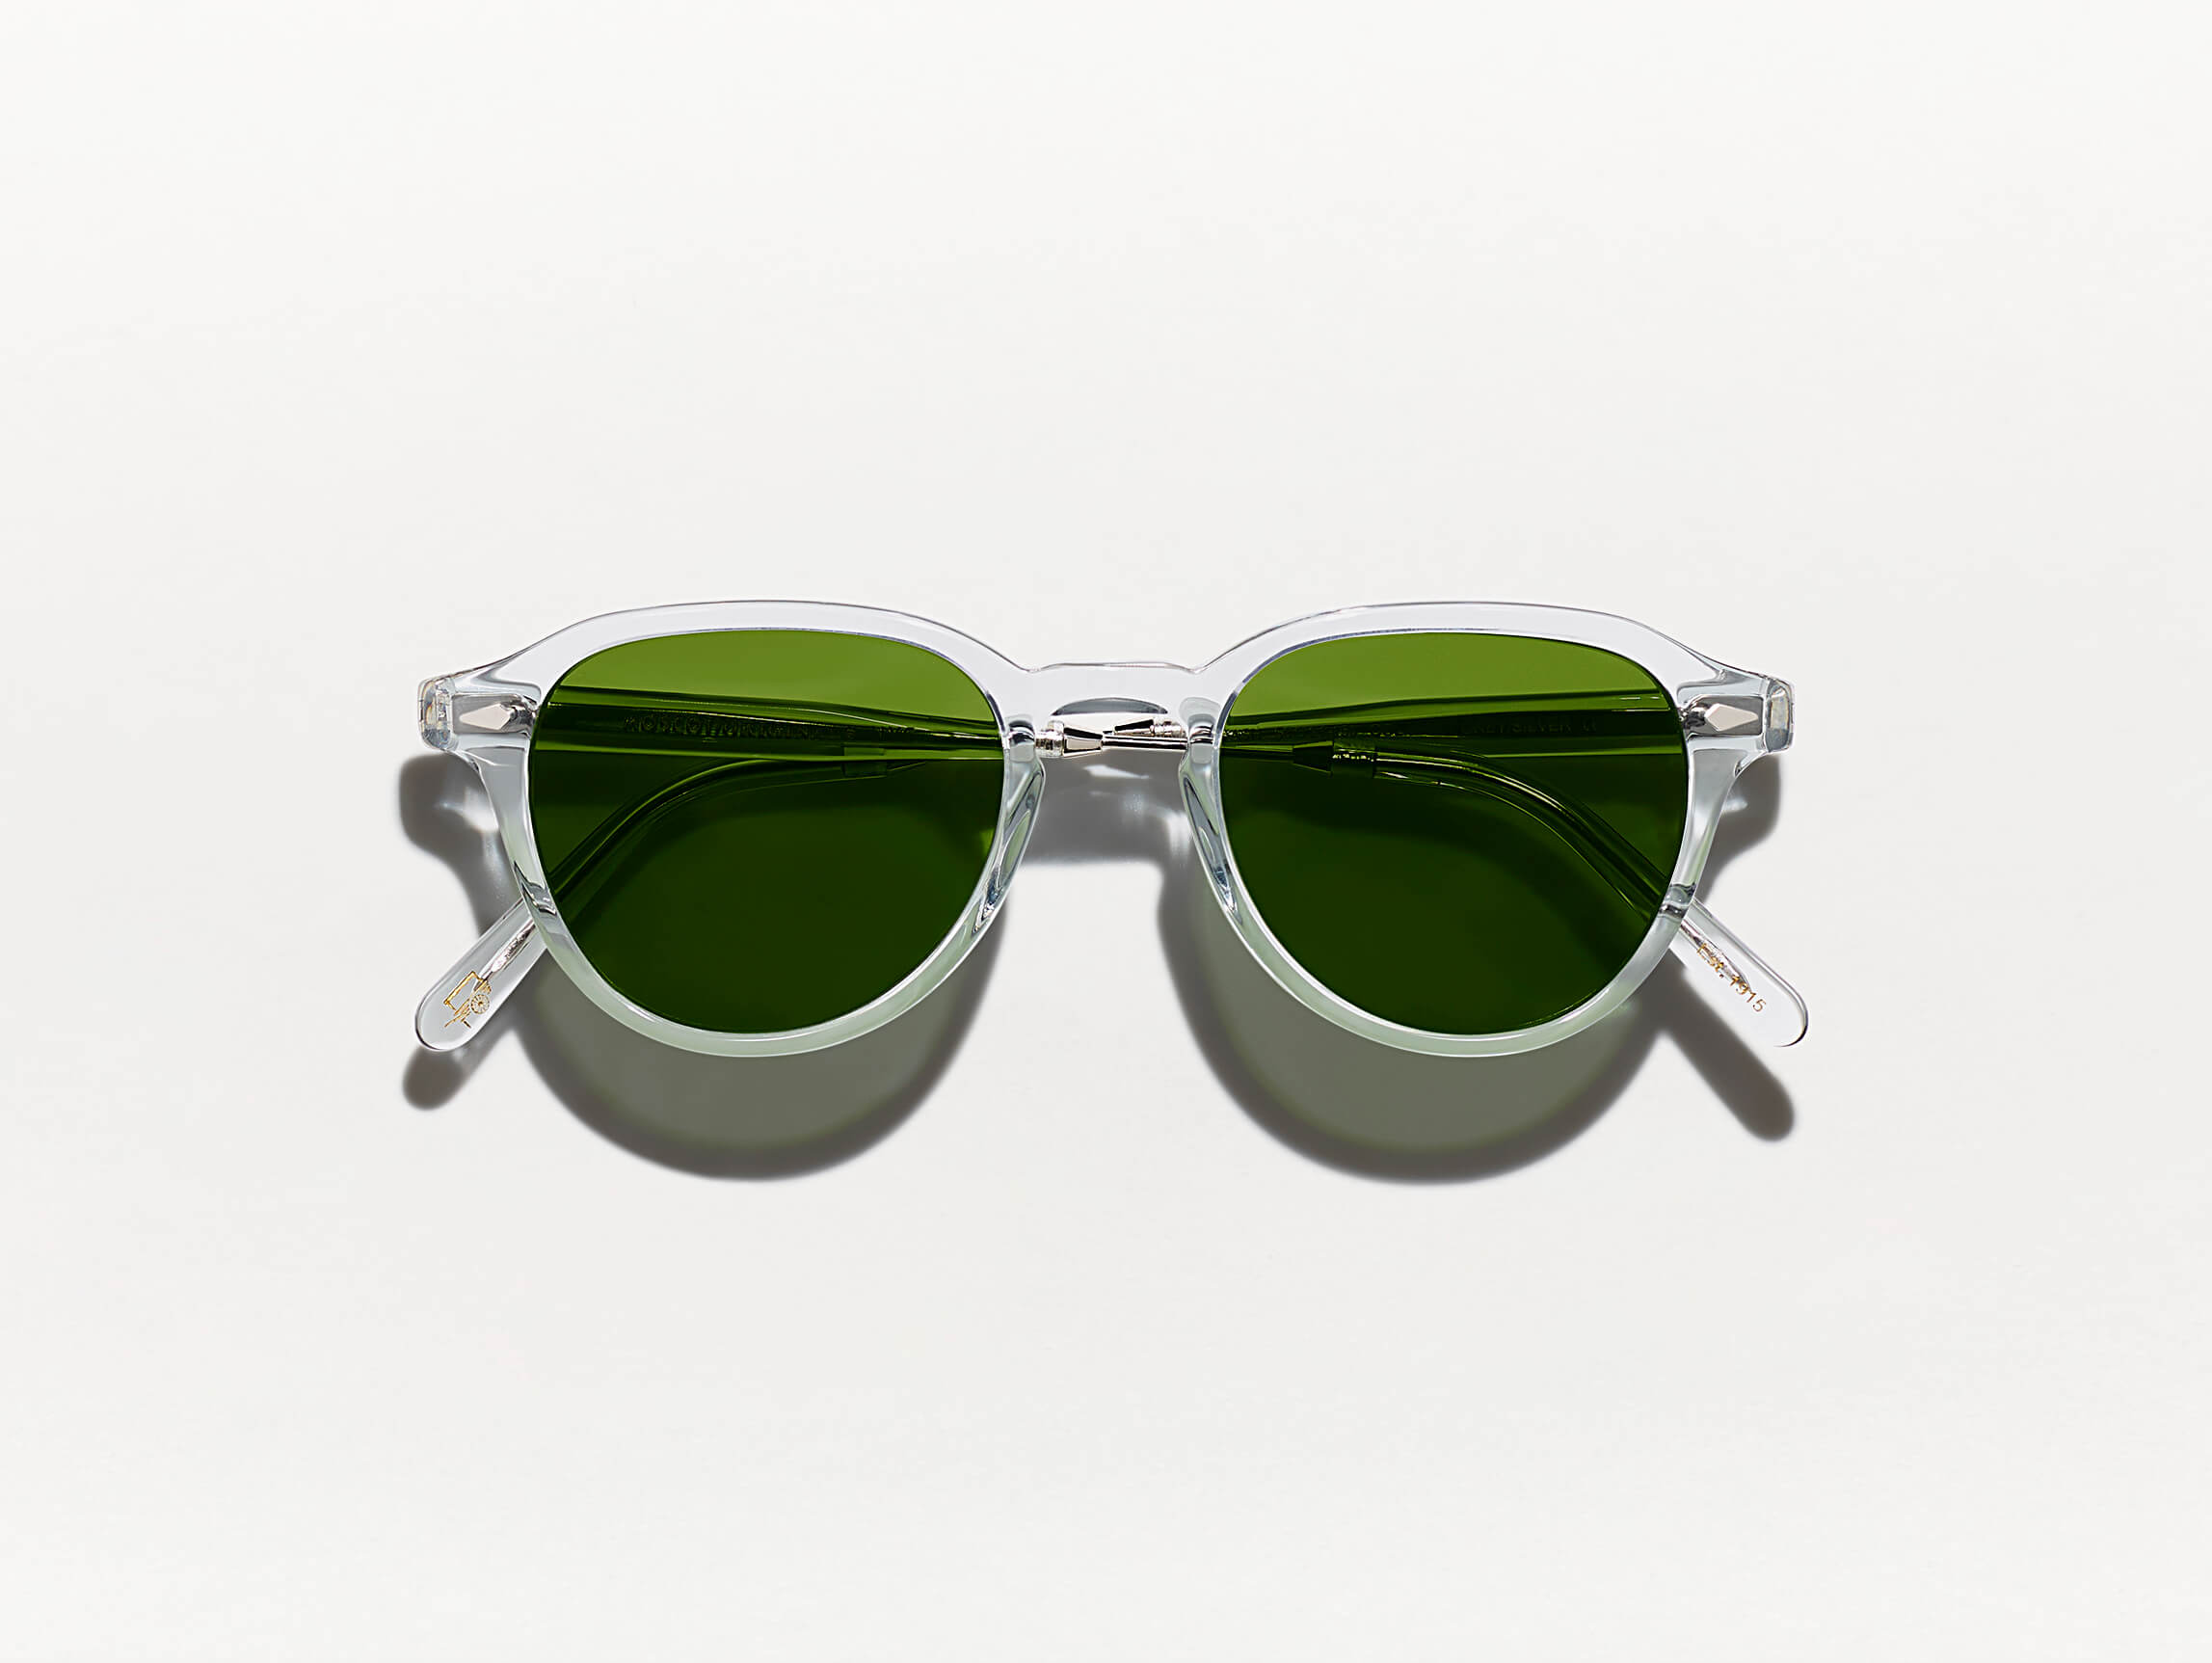 The KASH SUN in Light Grey/SIlver with Calibar Green Glass Lenses